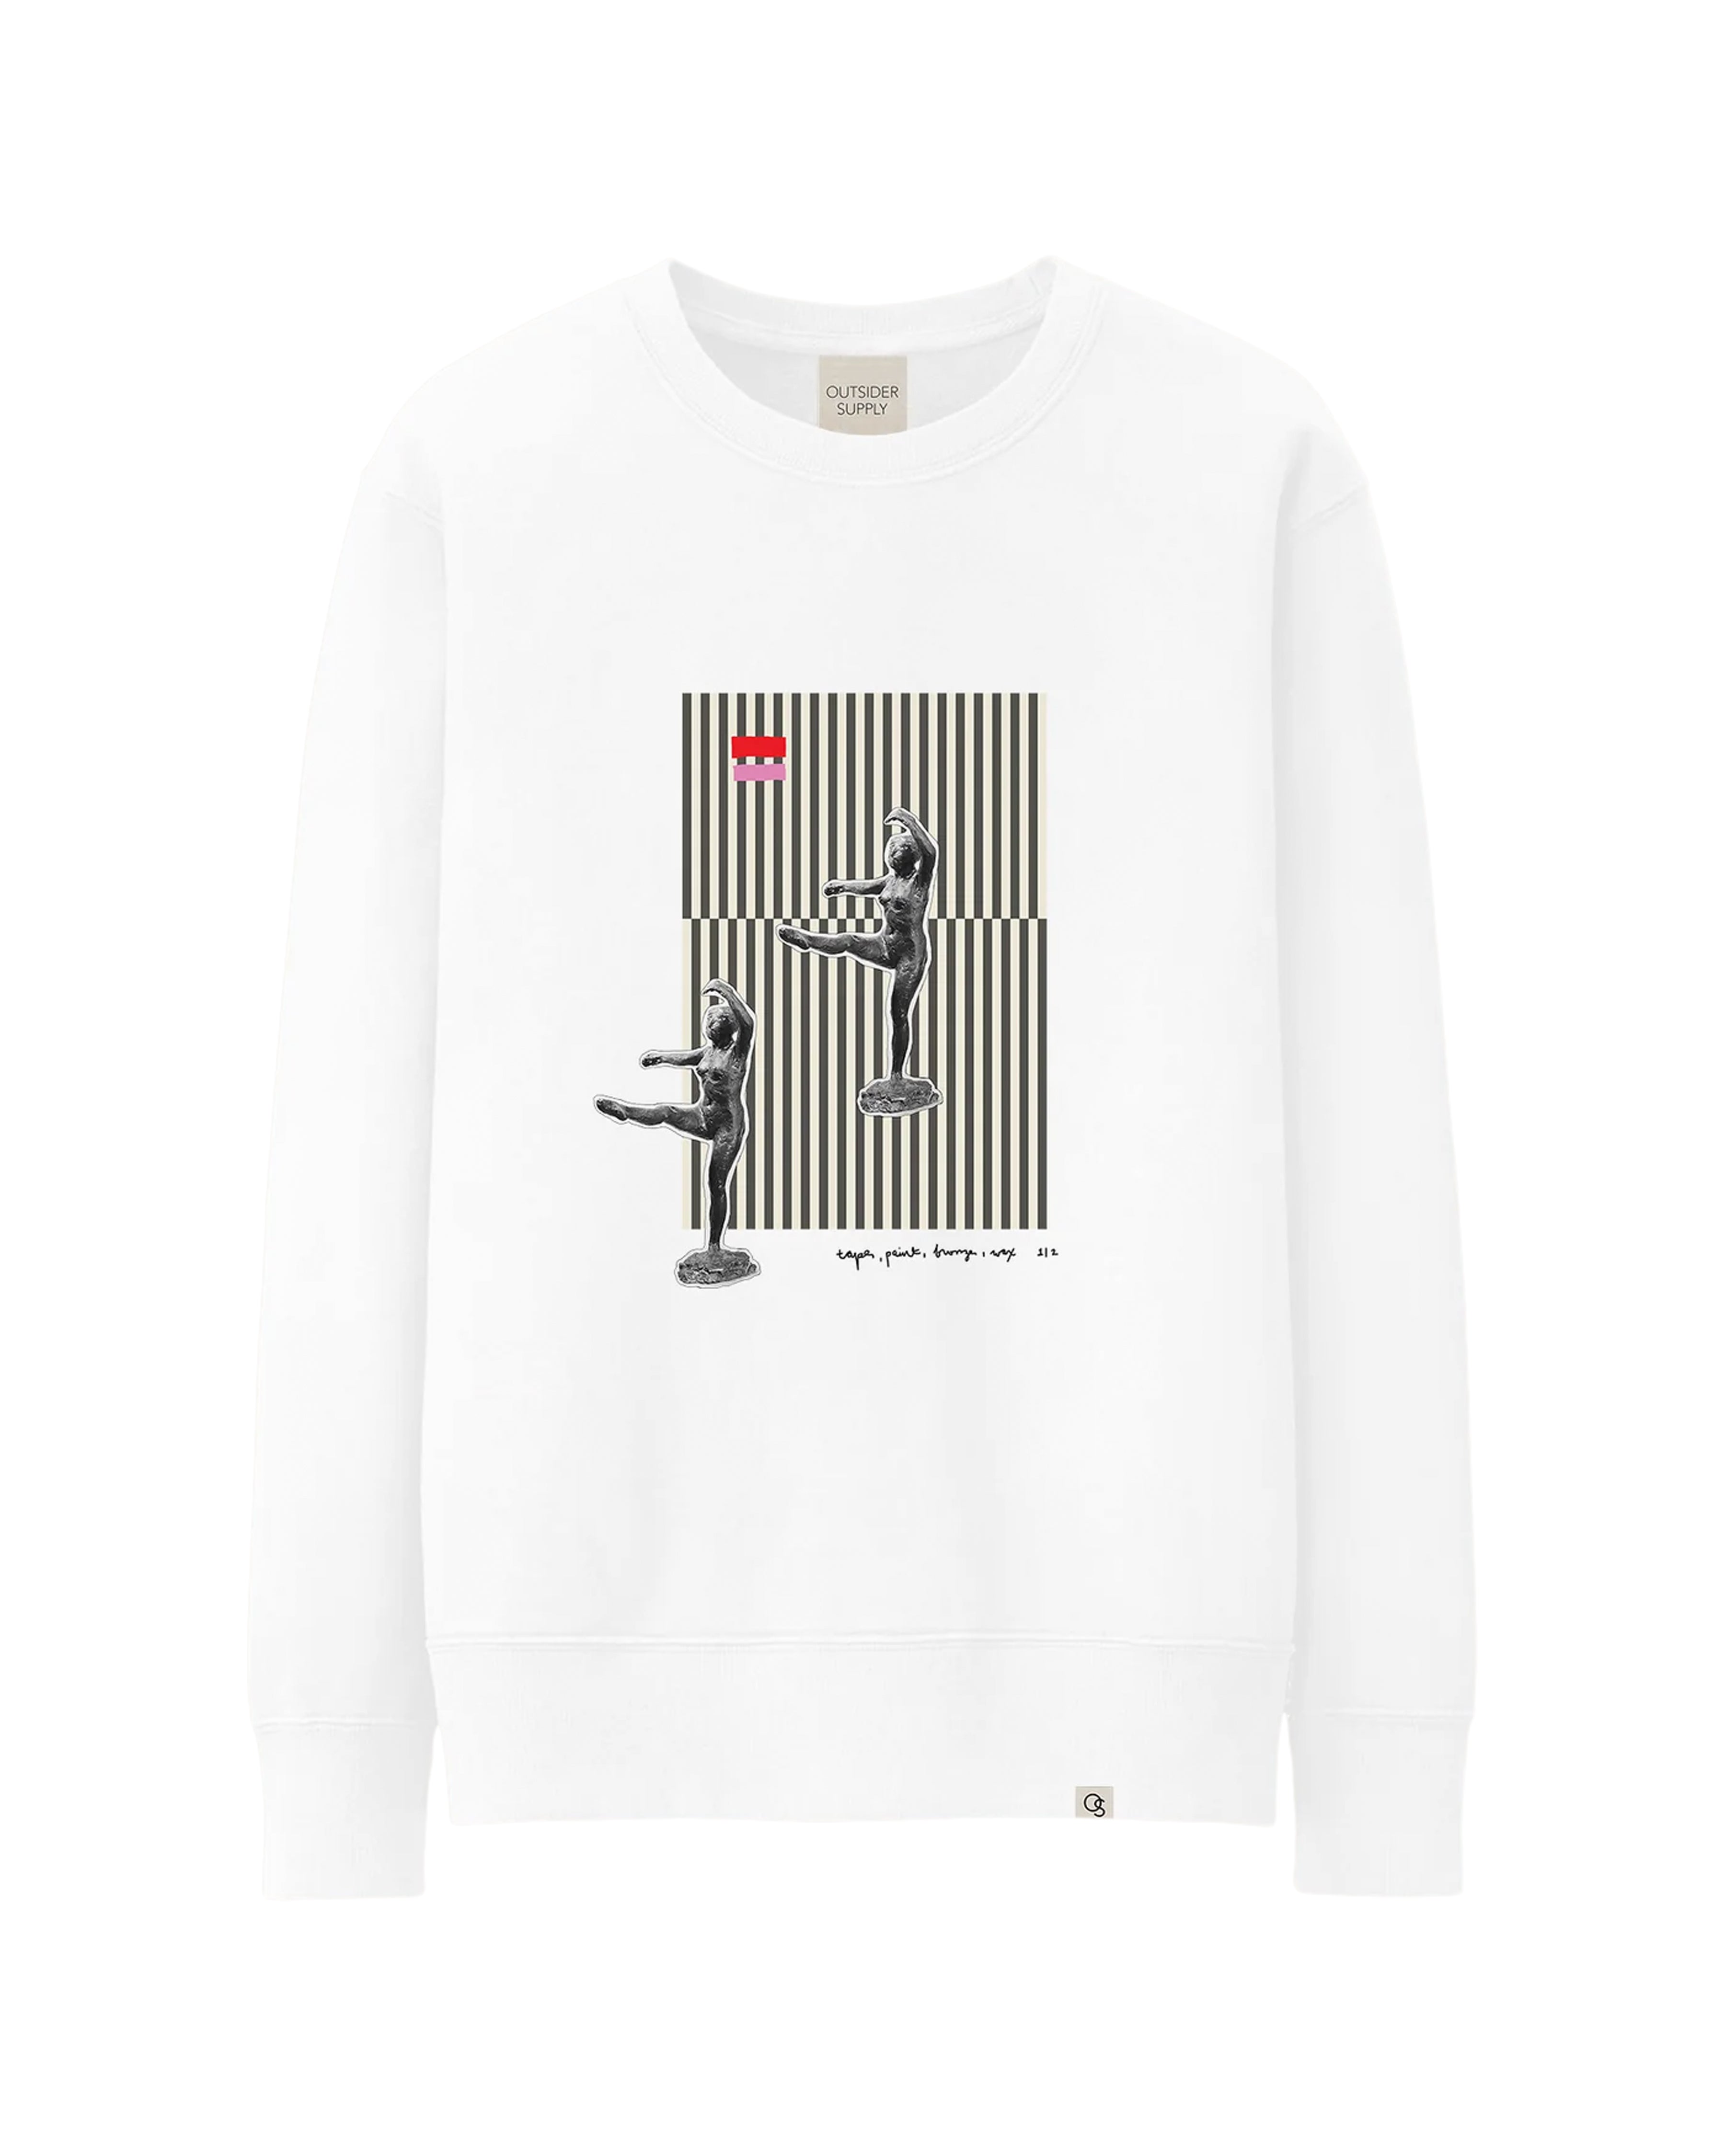 One Of Two Crewneck